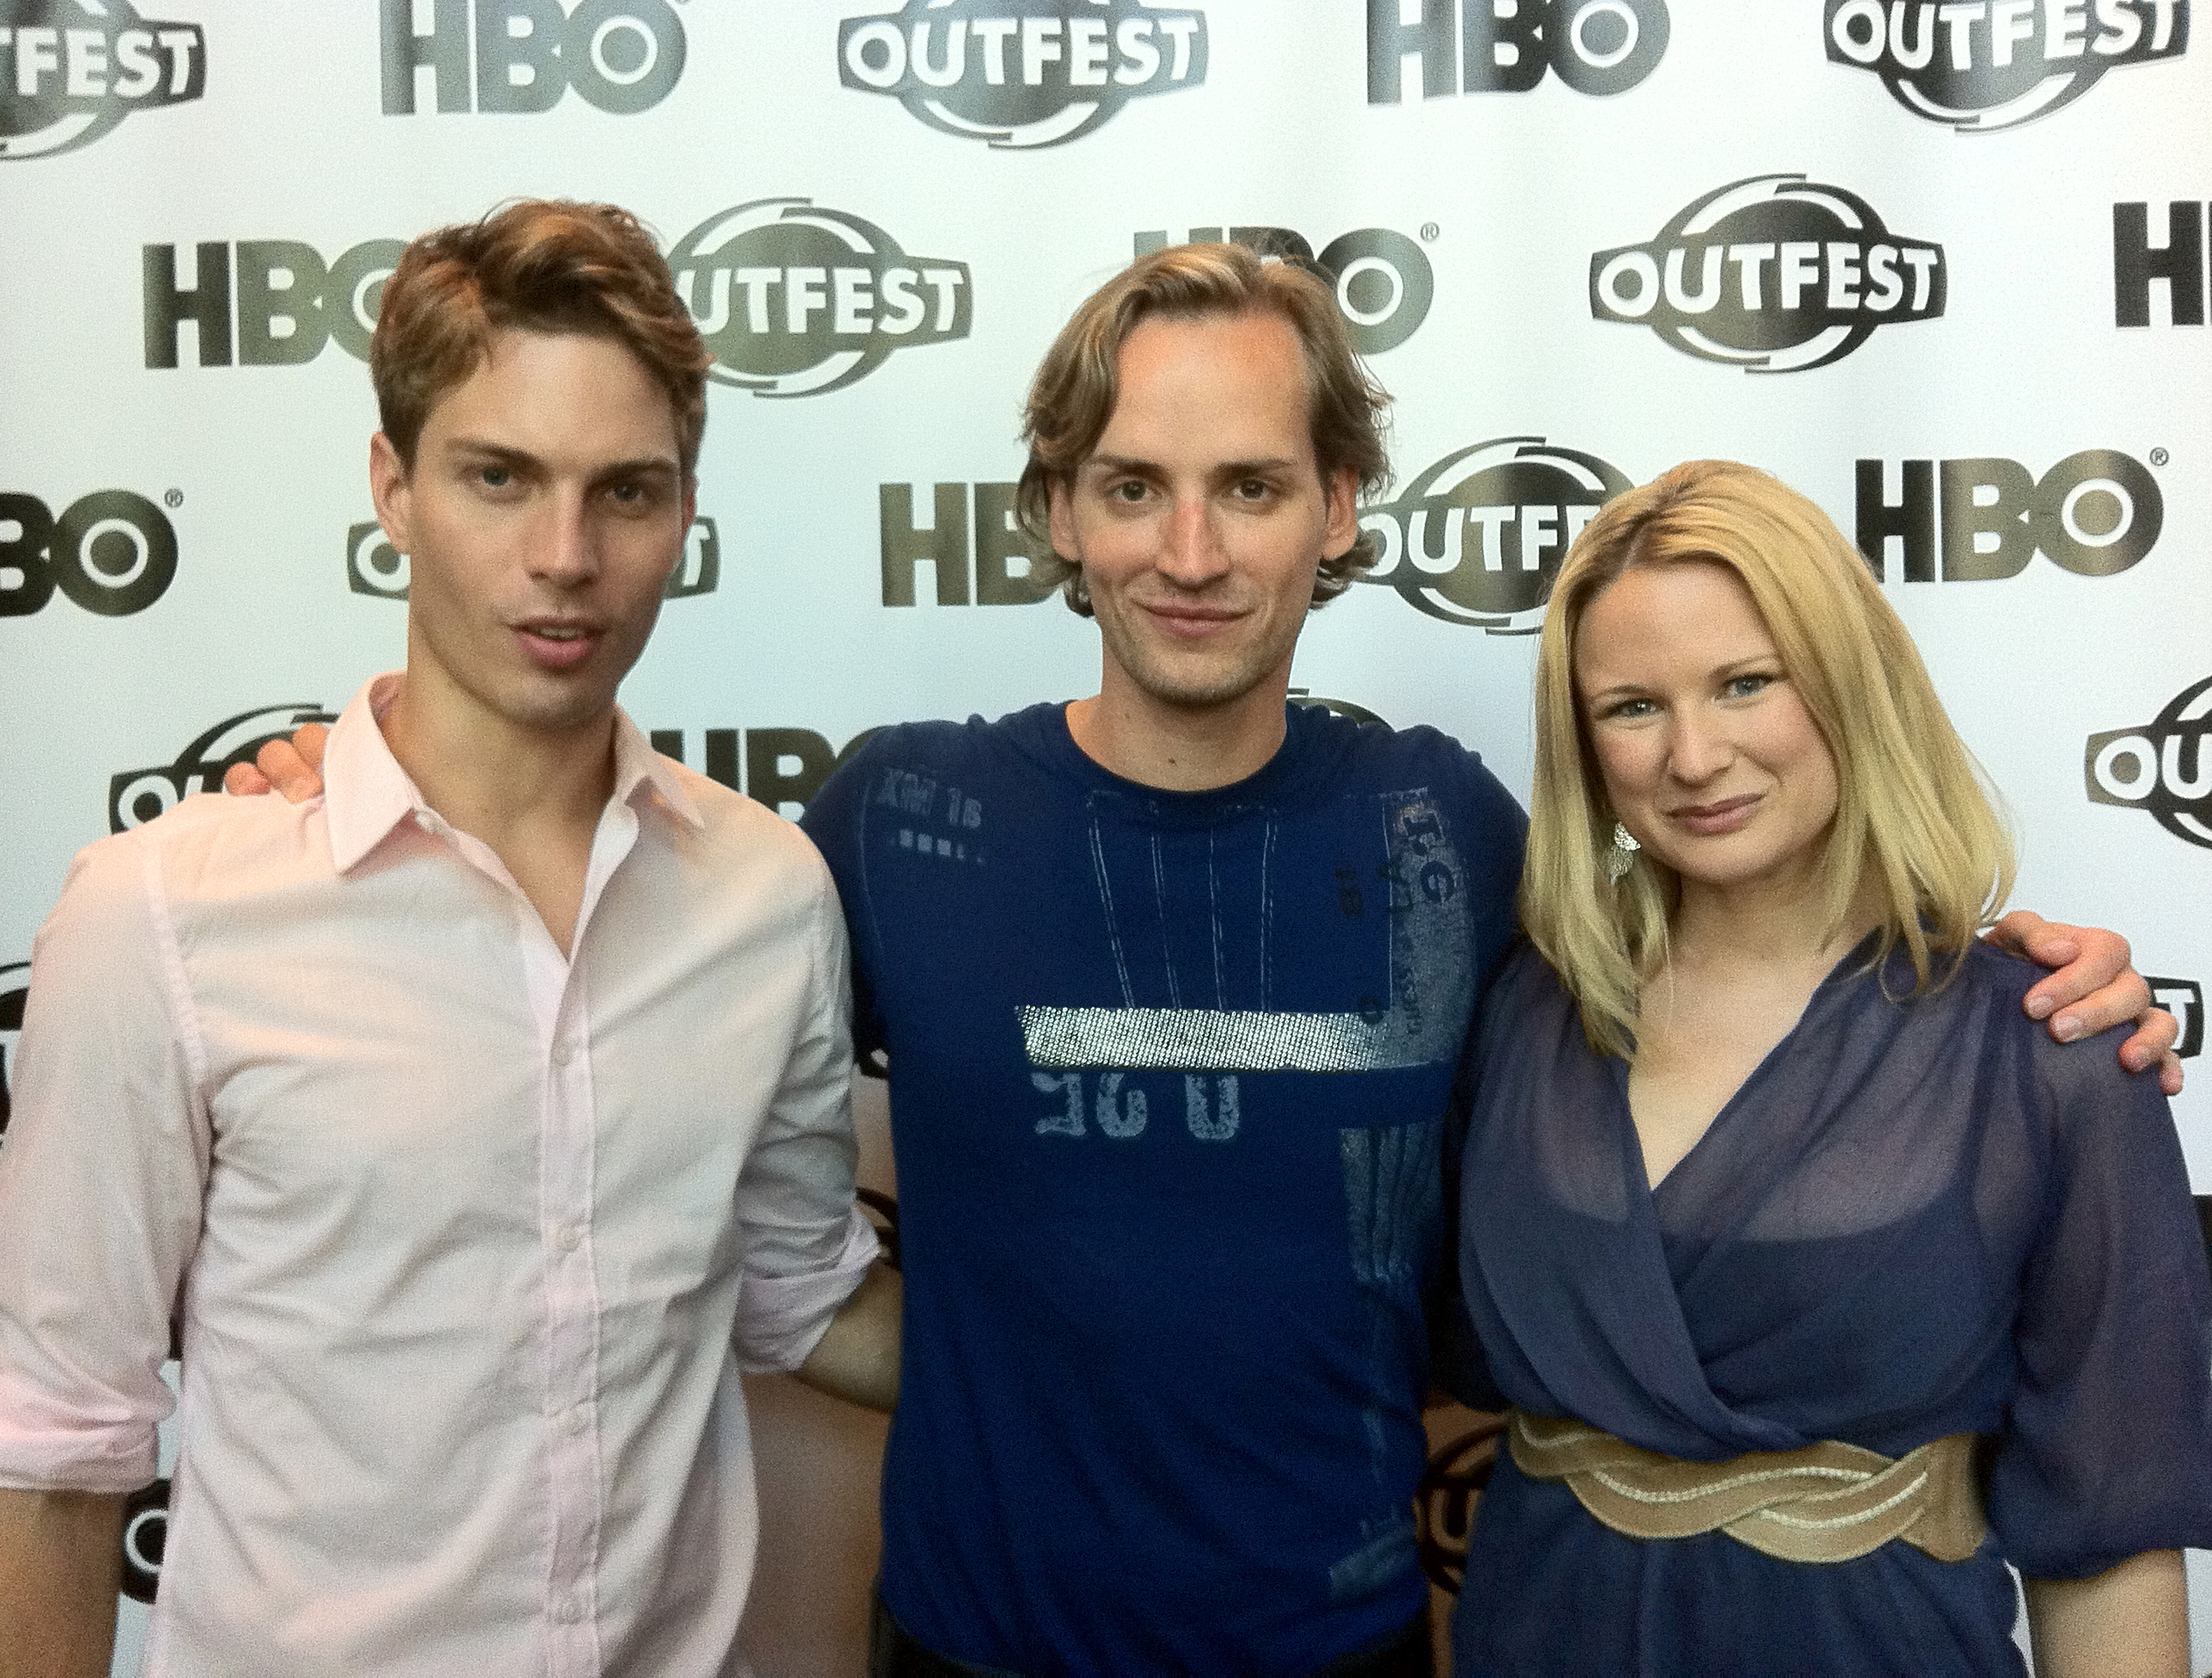 Matthew Ludwinski, Casper Andreas, and Allison Lane at Outfest for the Los Angeles premiere of 